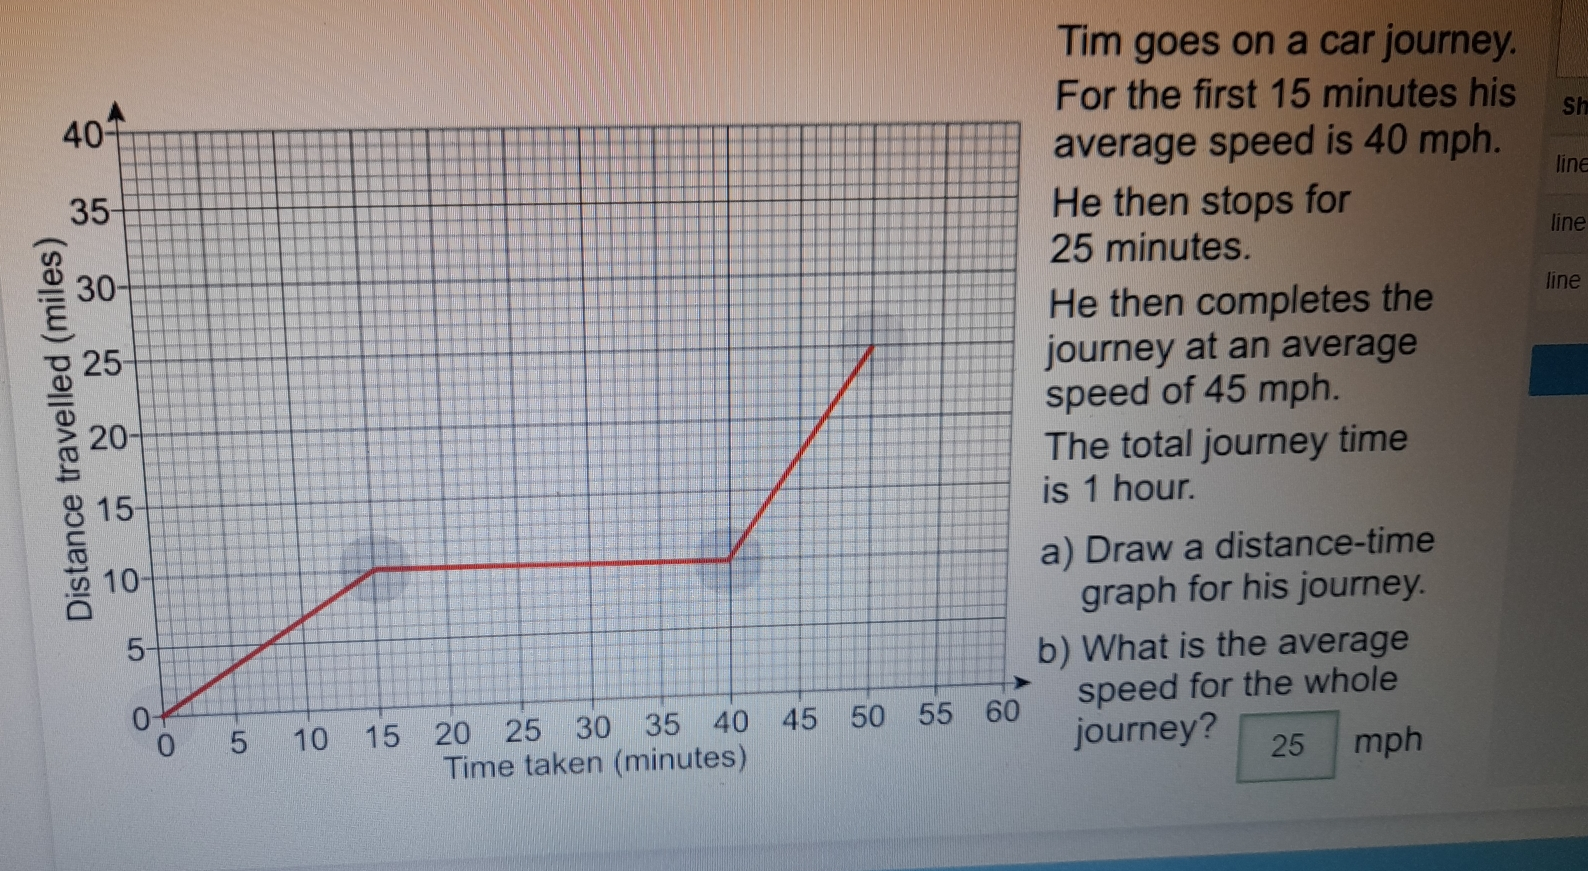 Tim goes on a car journey. or the first 15 minutes his Sh erage speed is 40 mph. line then stops for line minutes. line then completes the rney at an average eed of 45 mph. e total journey time 1 hour. Draw a distance-time graph for his journey. What is the average peed for the whole ourney? 25 mph